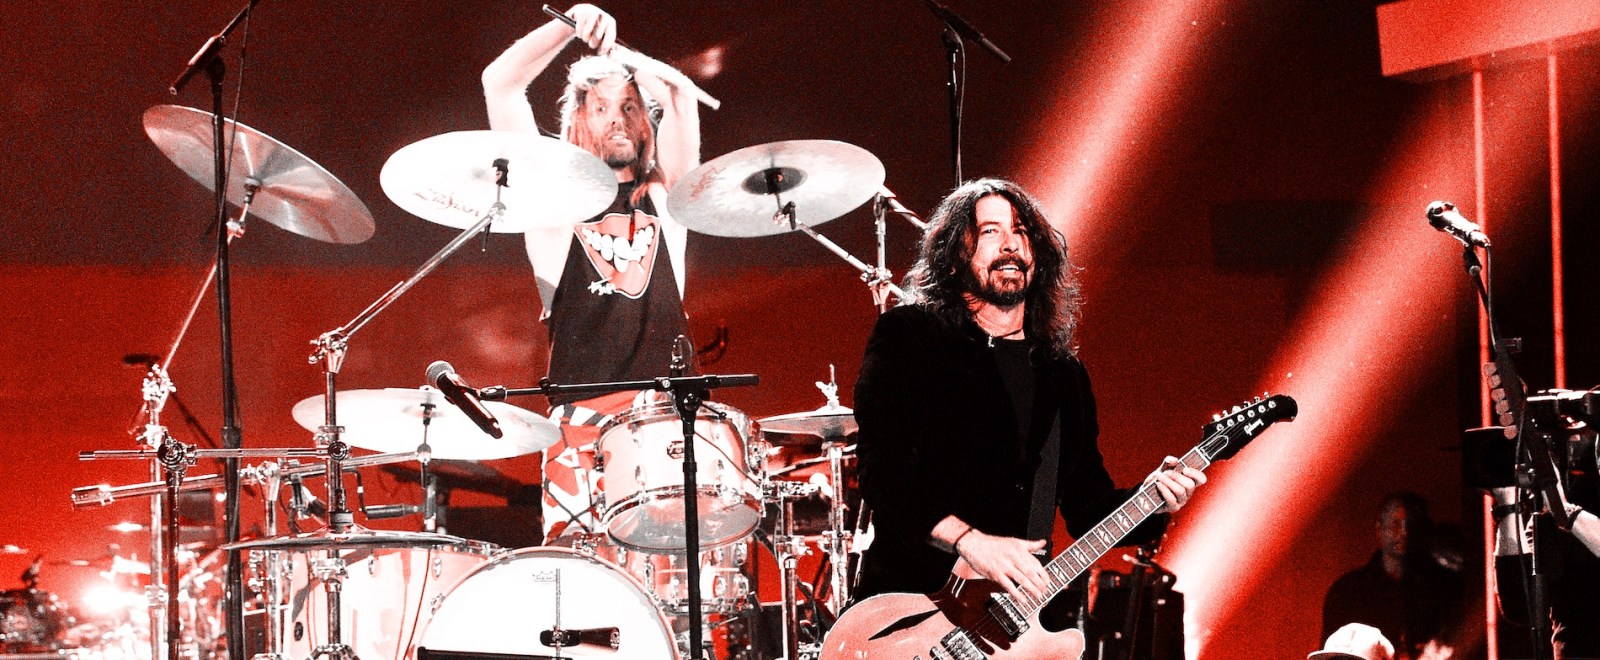 Foo Fighters Taylor Hawkins Dave Grohl Grammy Salute To Prince 2020 most performed songs